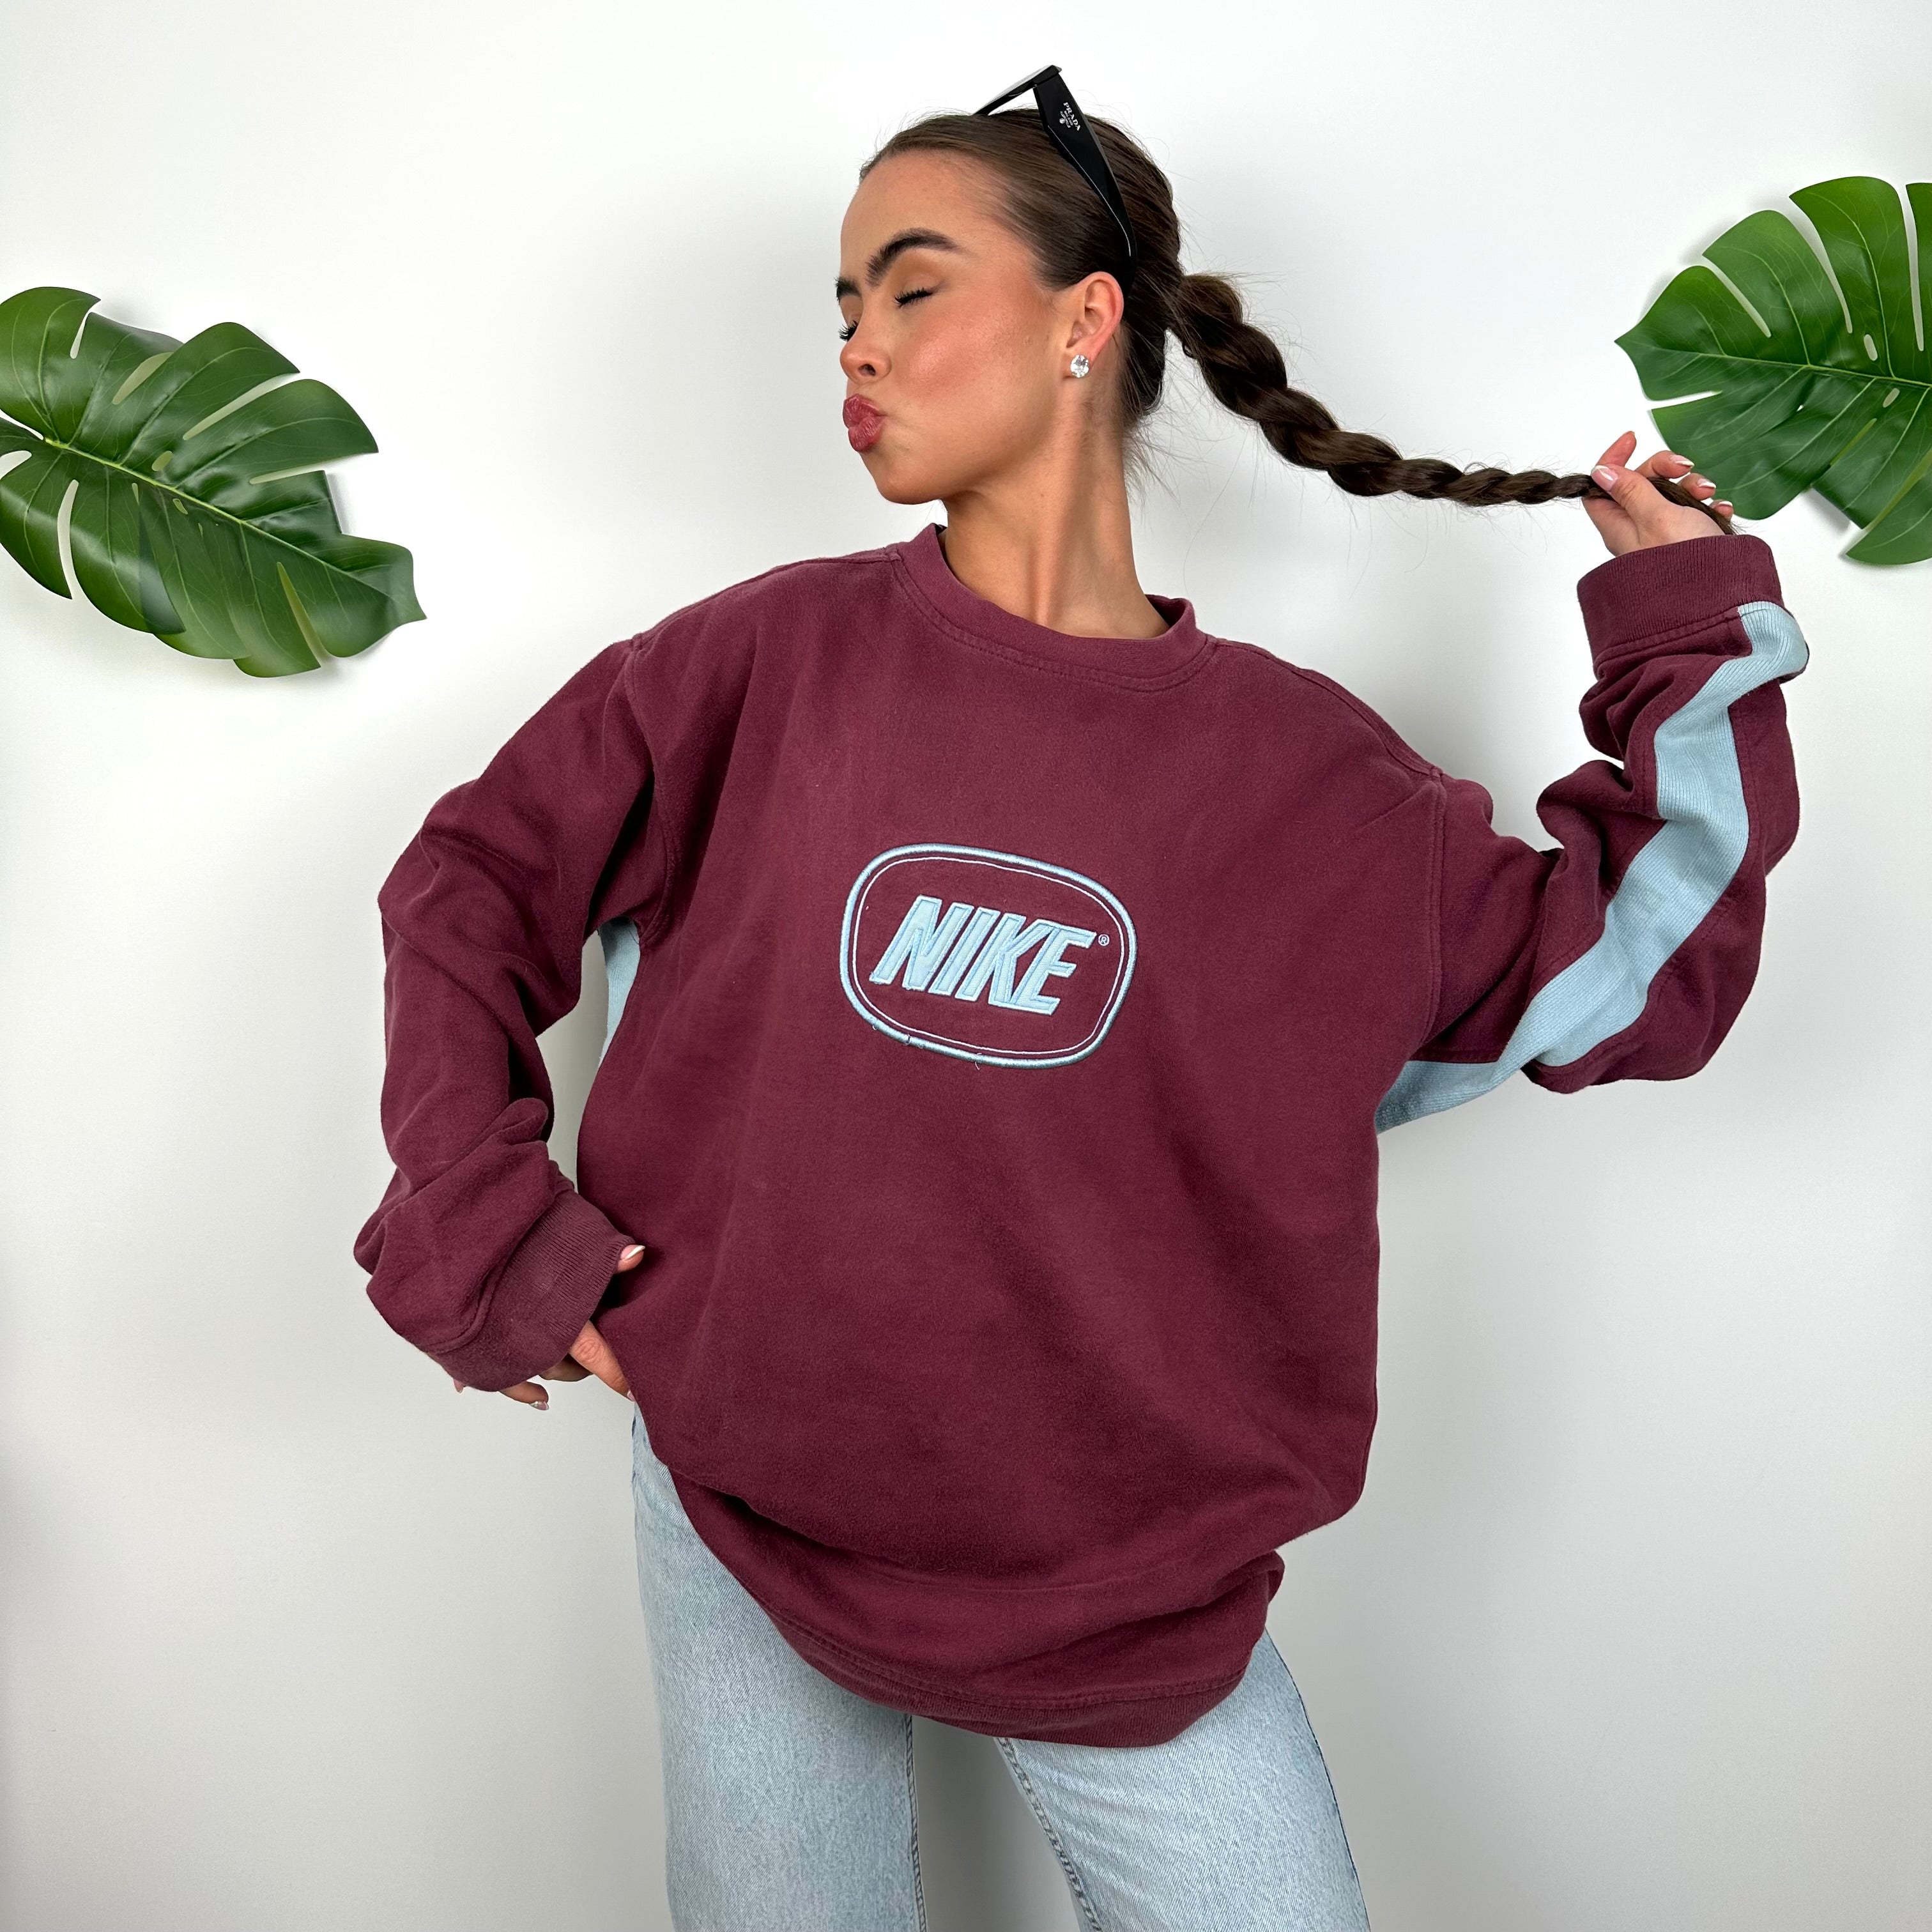 Nike Maroon Embroidered Spell Out Sweatshirt (XL)